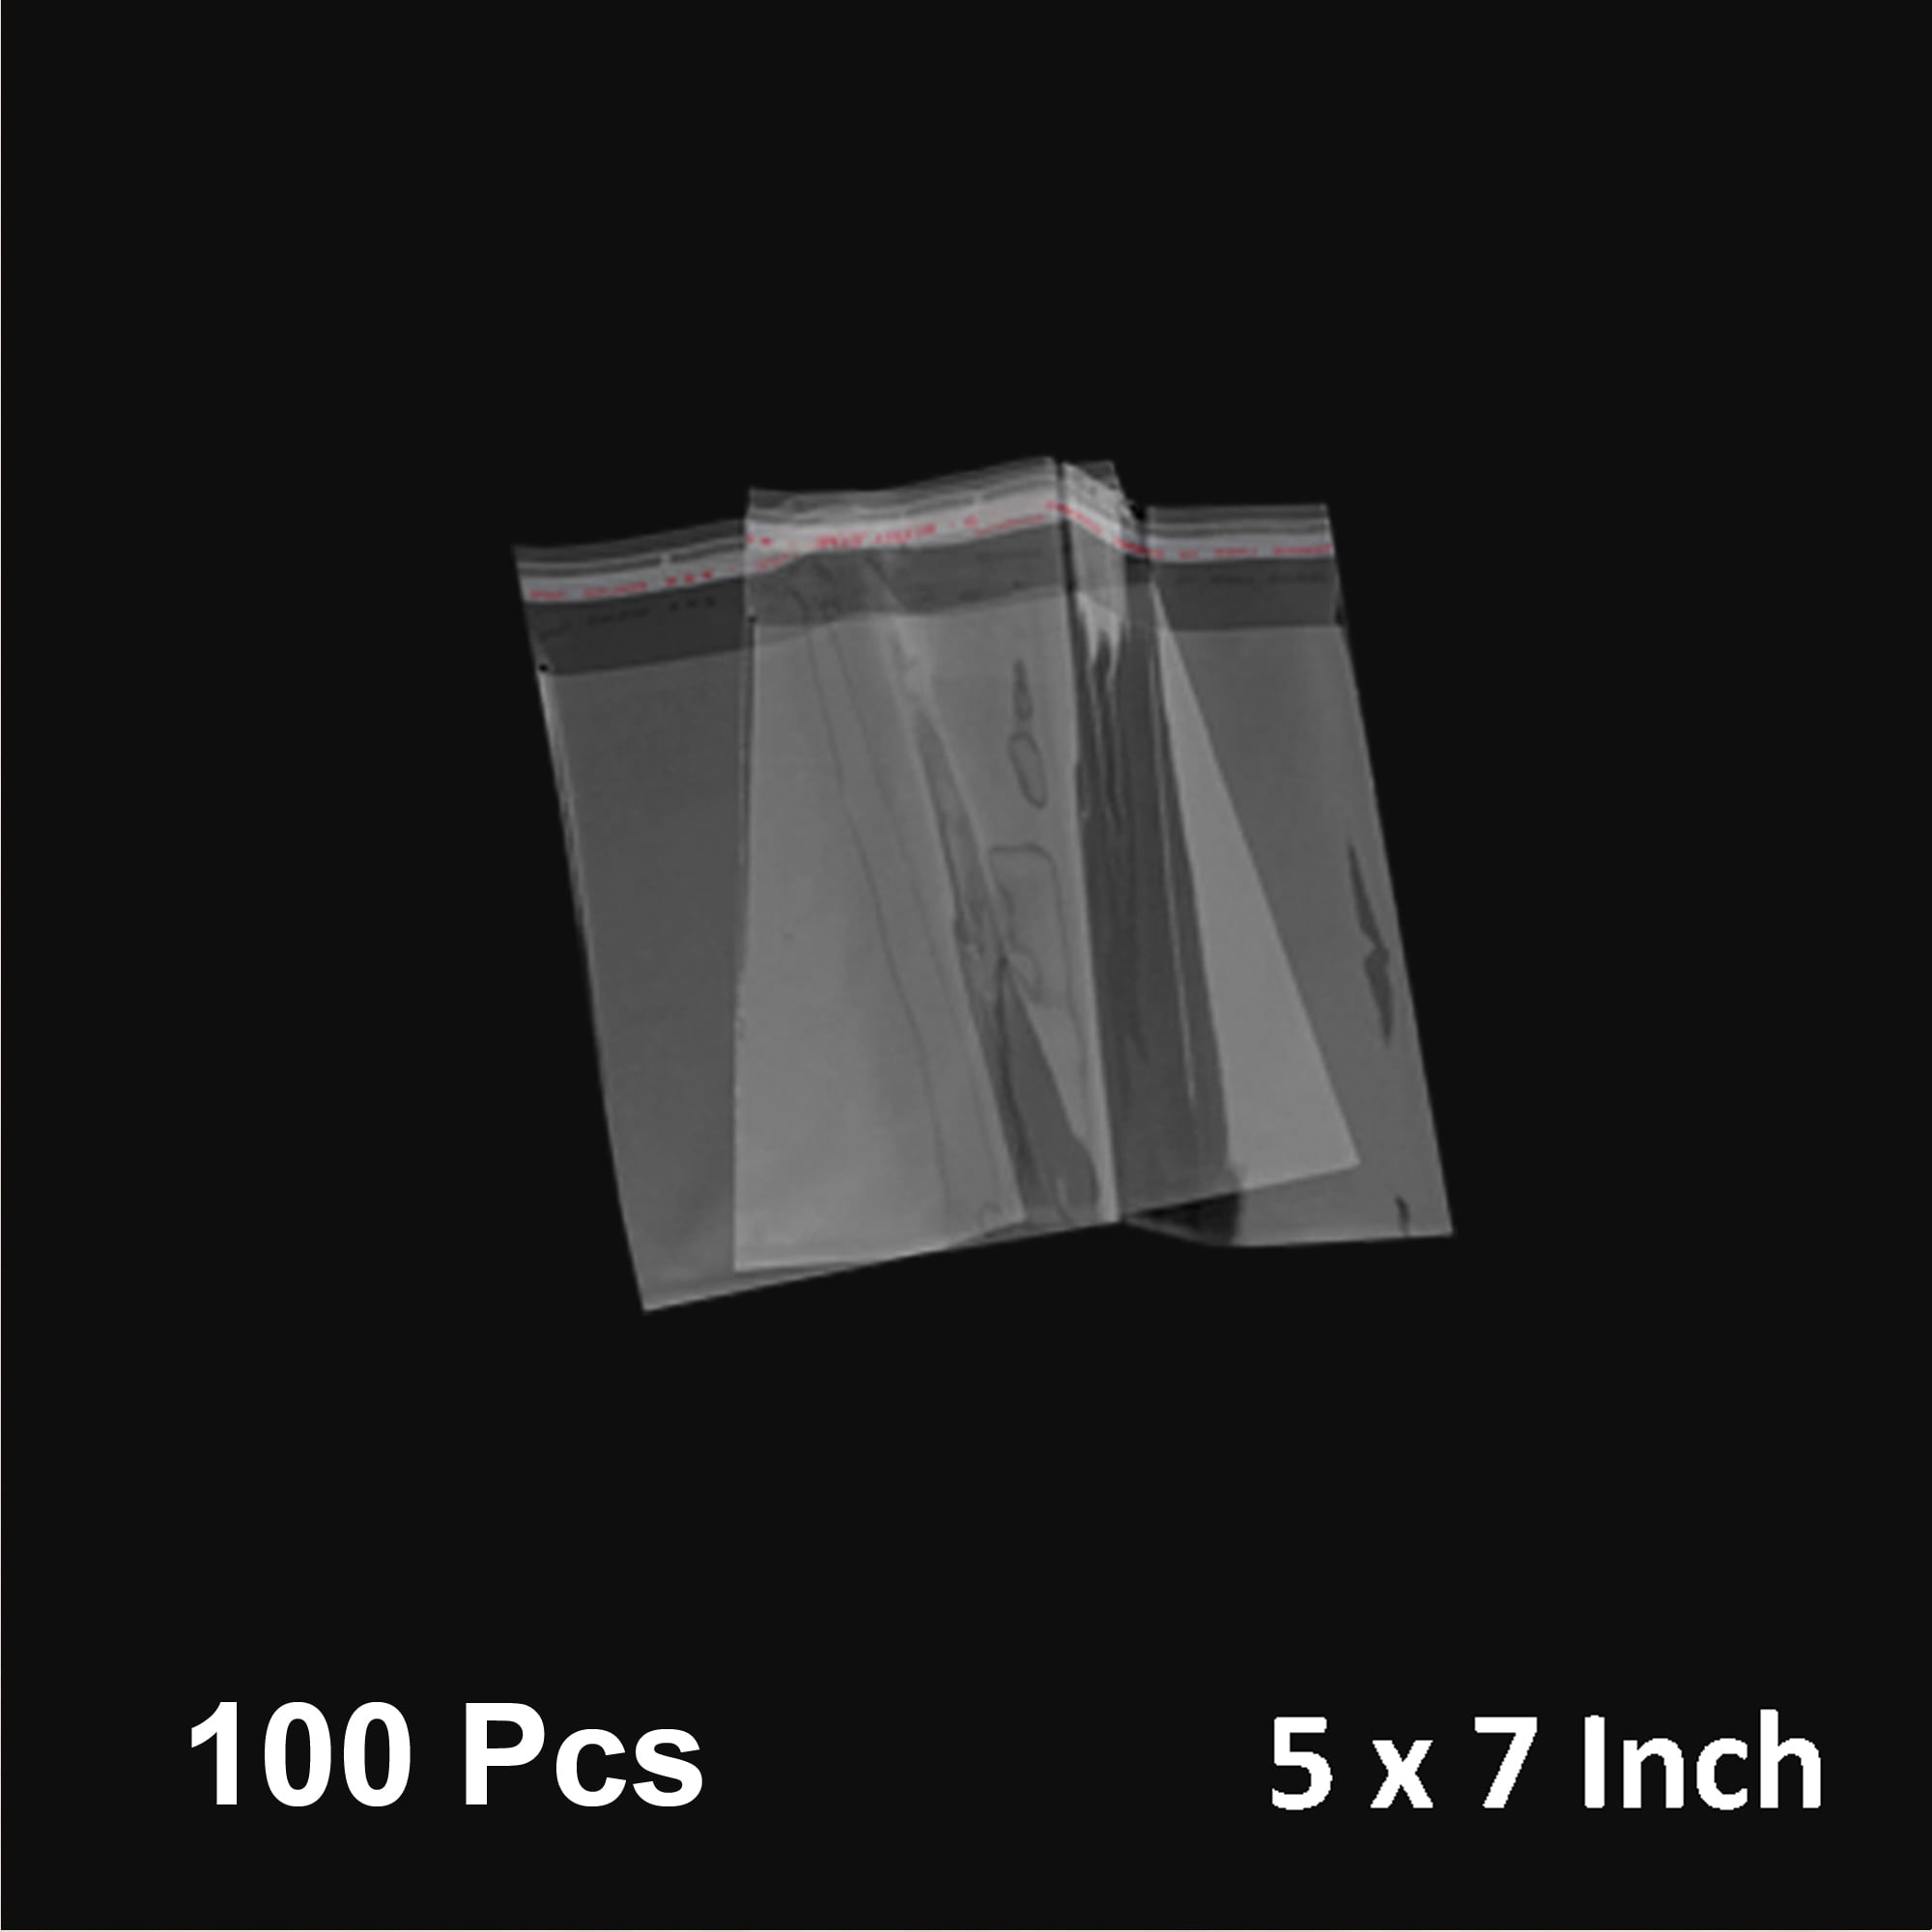 200 Pcs 8x10 Clear Resealable Poly Cellophane Cello Bags Sleeves 8 x 10 